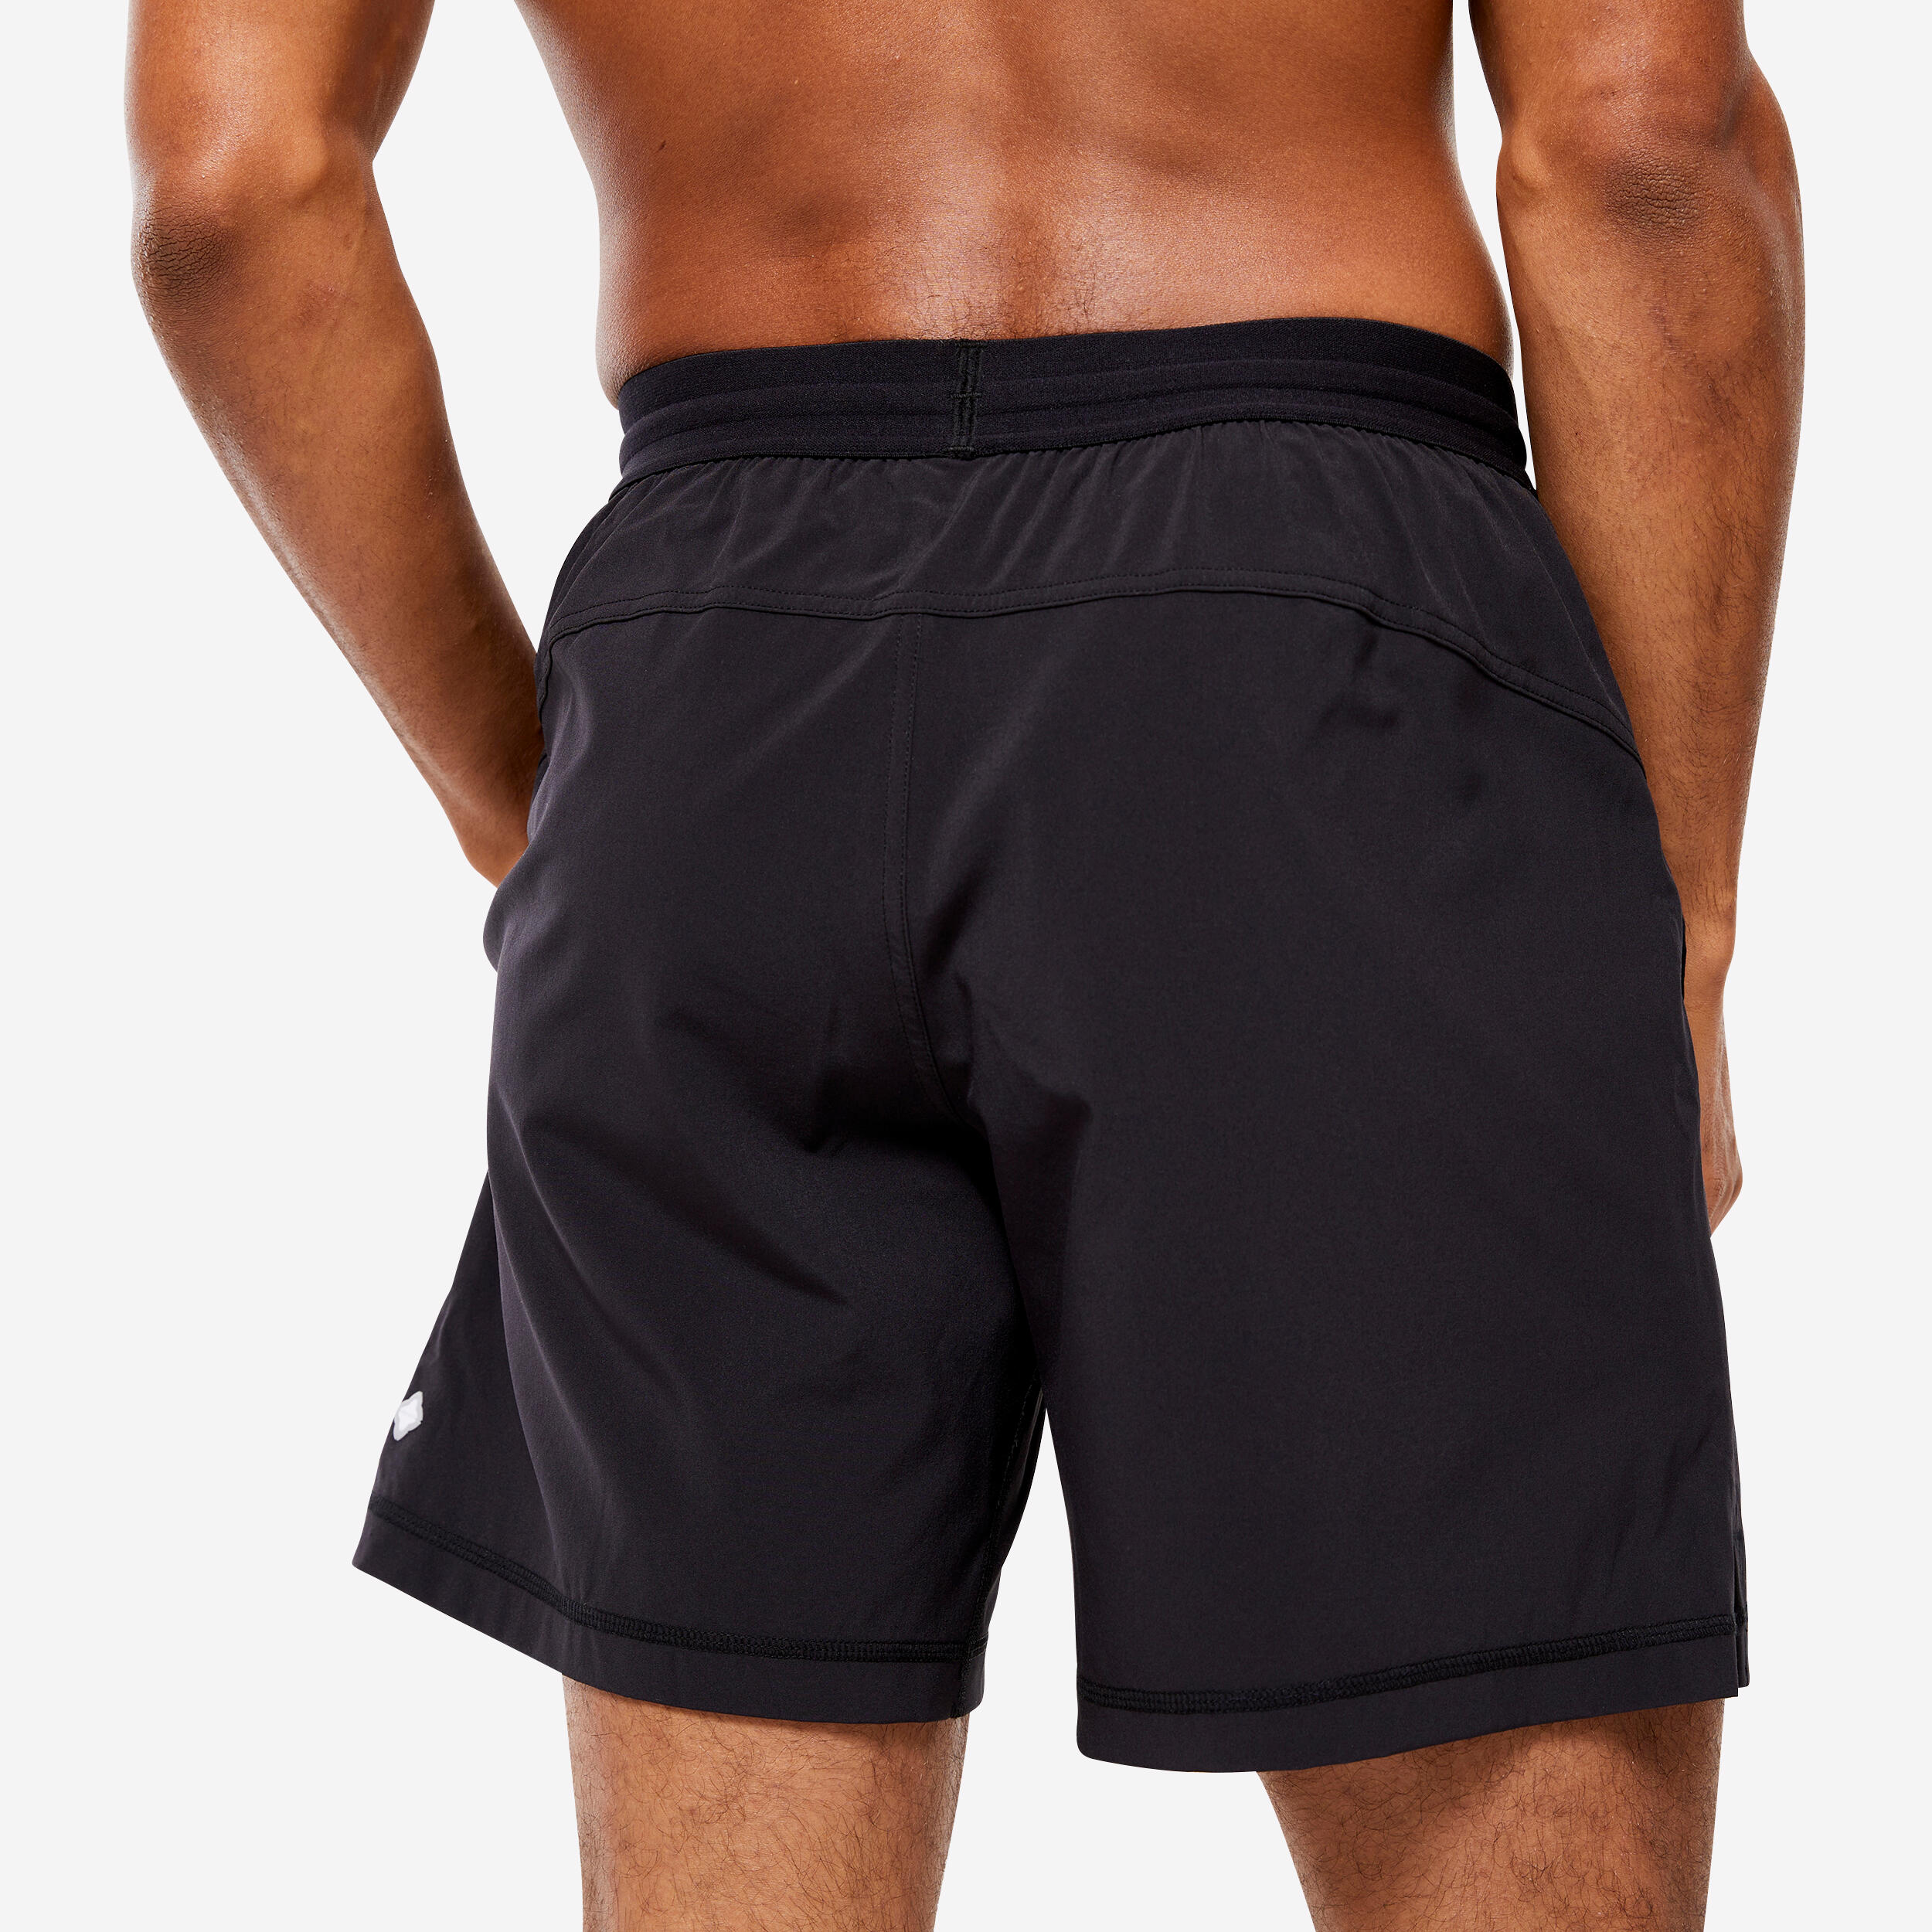 Men's Hot Yoga Ultra-Lightweight Shorts with Built-in Briefs - Black 4/6